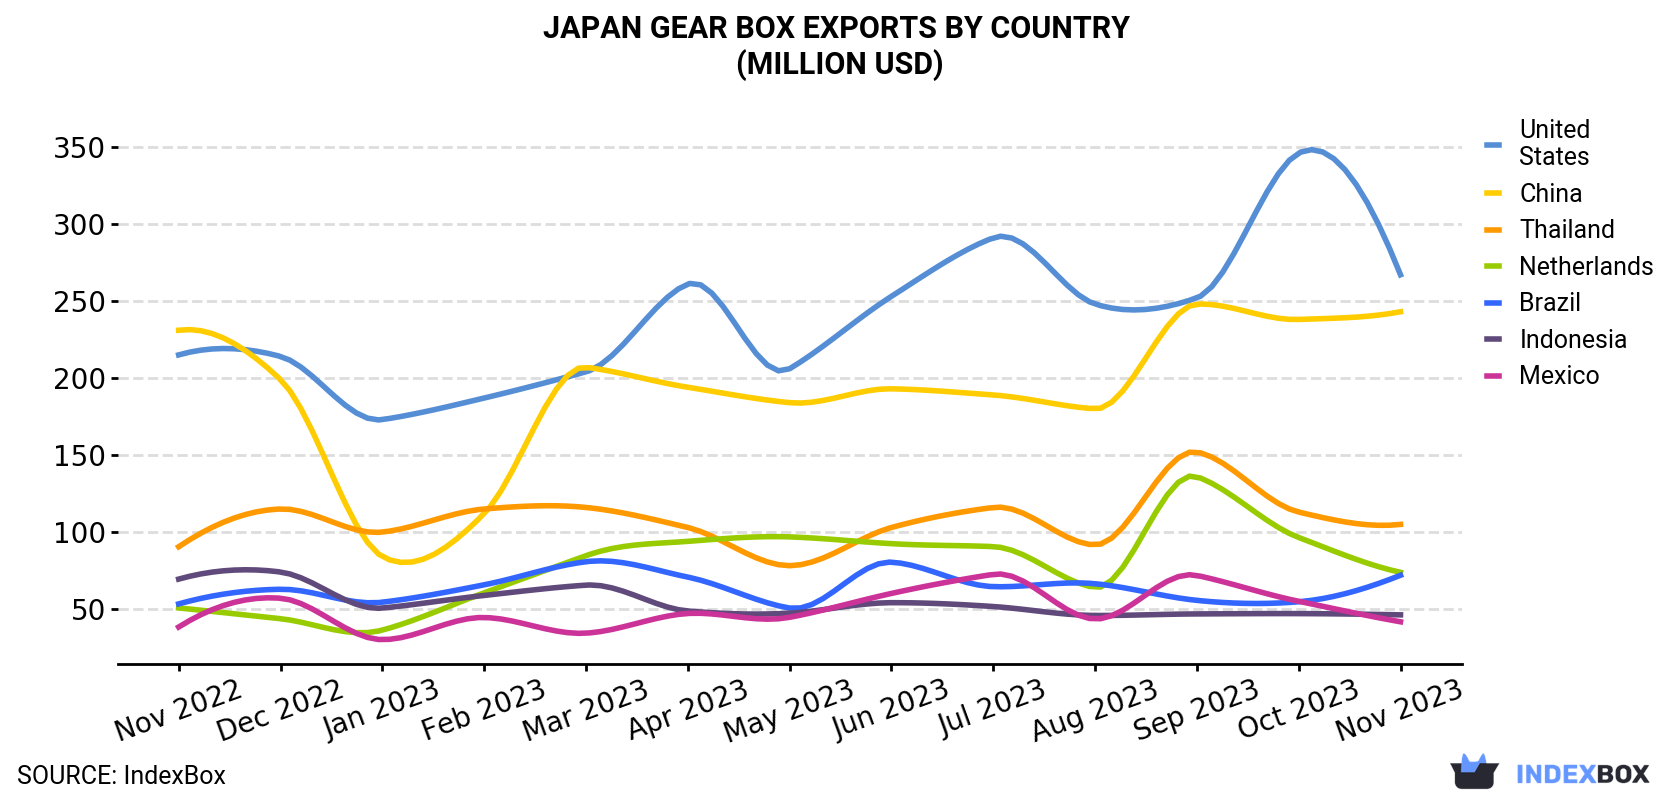 Japan Gear Box Exports By Country (Million USD)